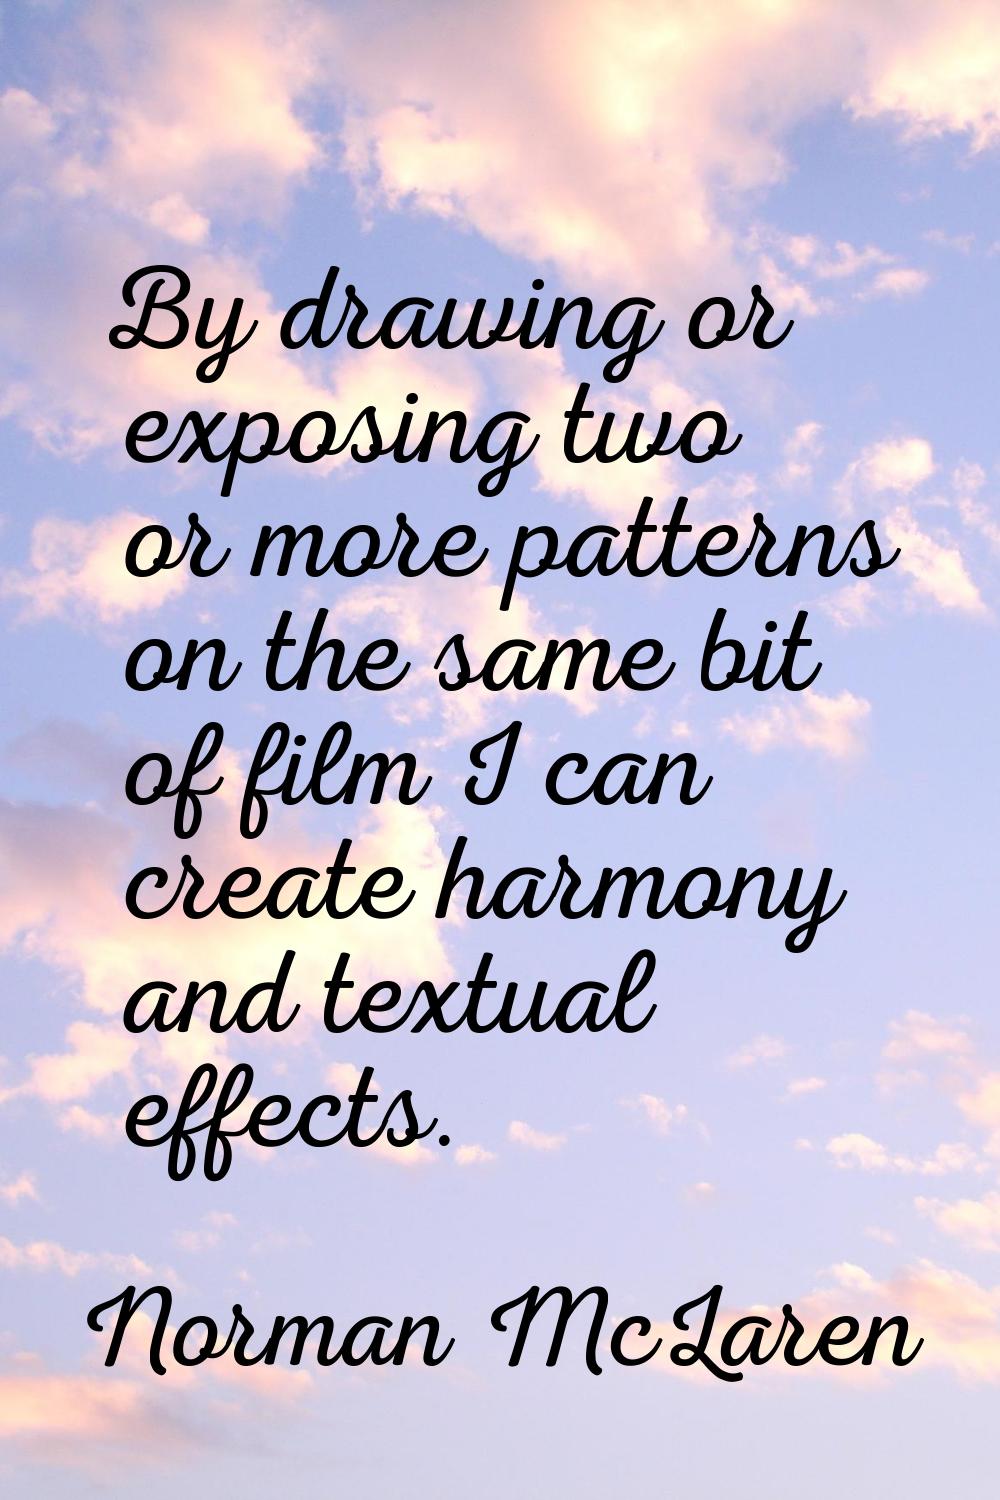 By drawing or exposing two or more patterns on the same bit of film I can create harmony and textua